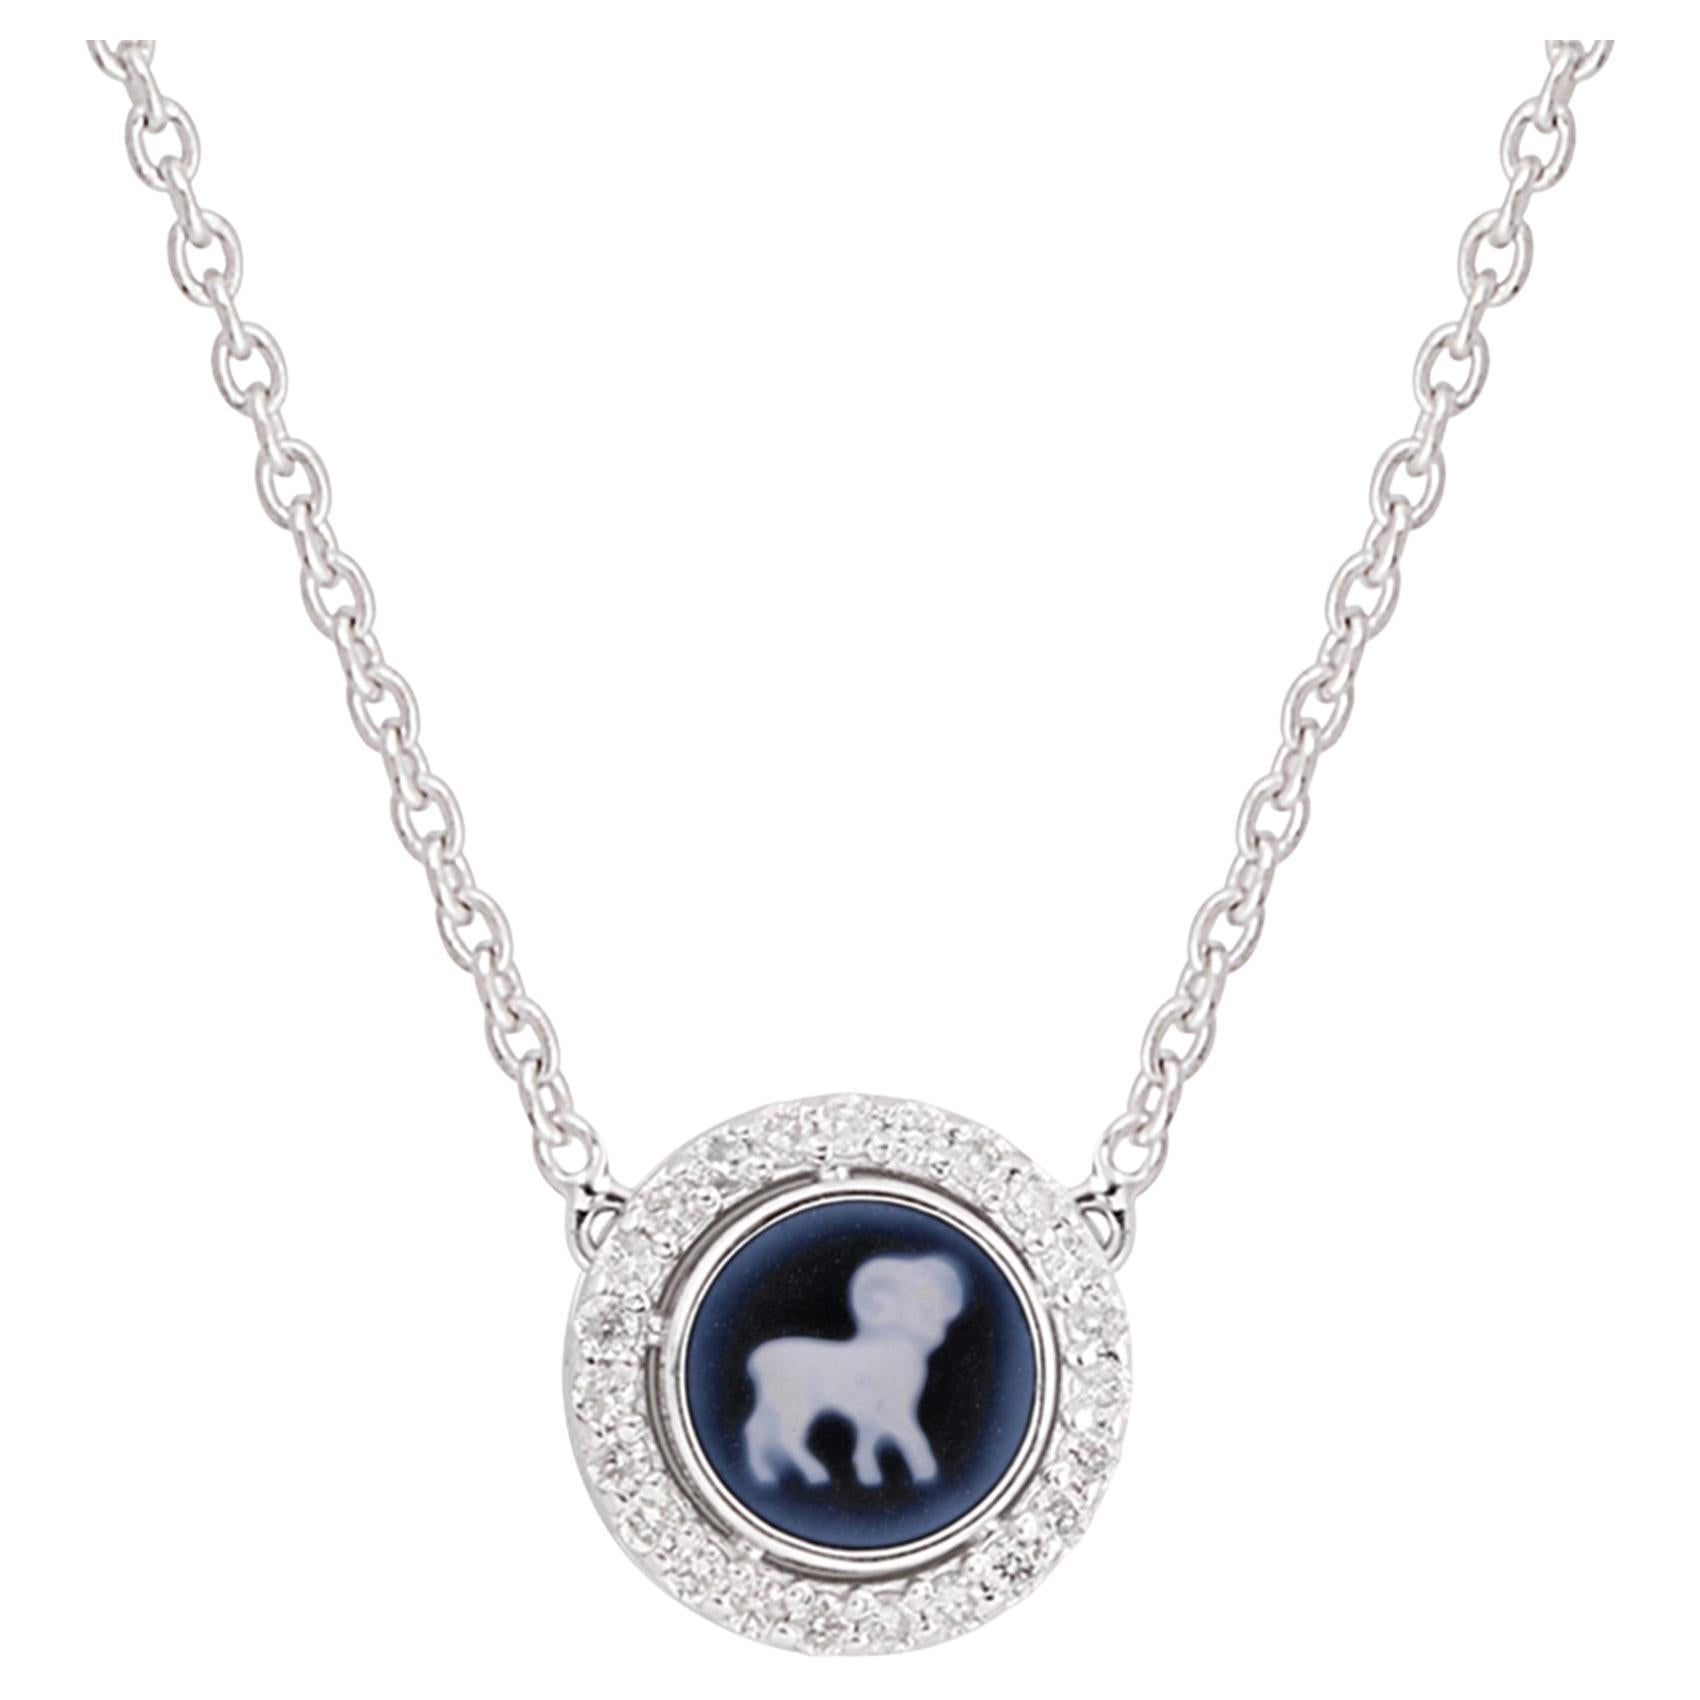 Aries Horoscope Sign H/SI Pave Diamond Pendant 14k White Gold Necklace 1.12 Tcw